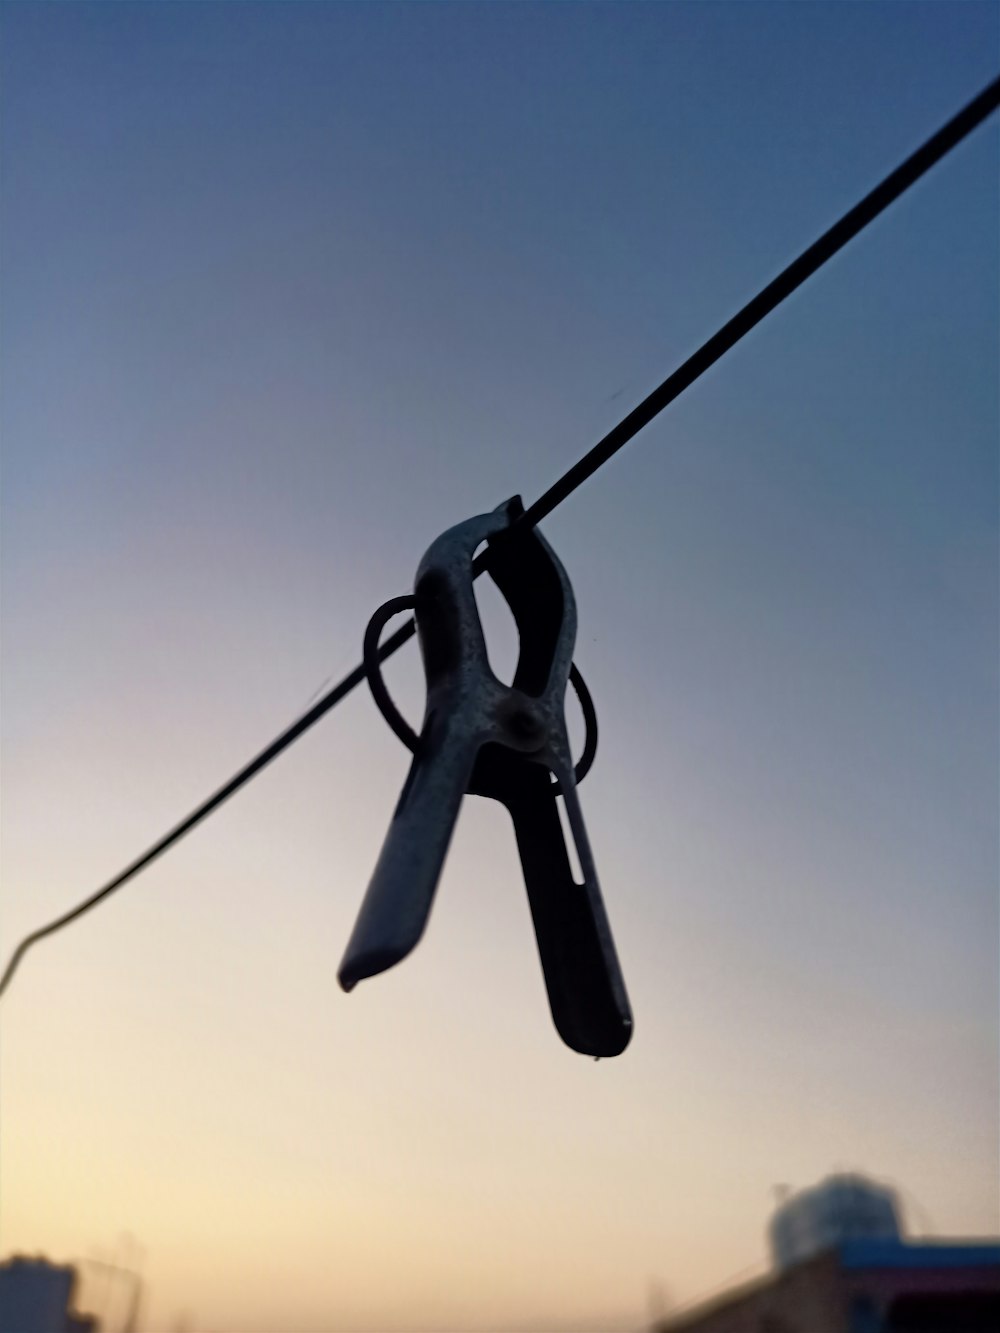 a pair of scissors hanging from a wire